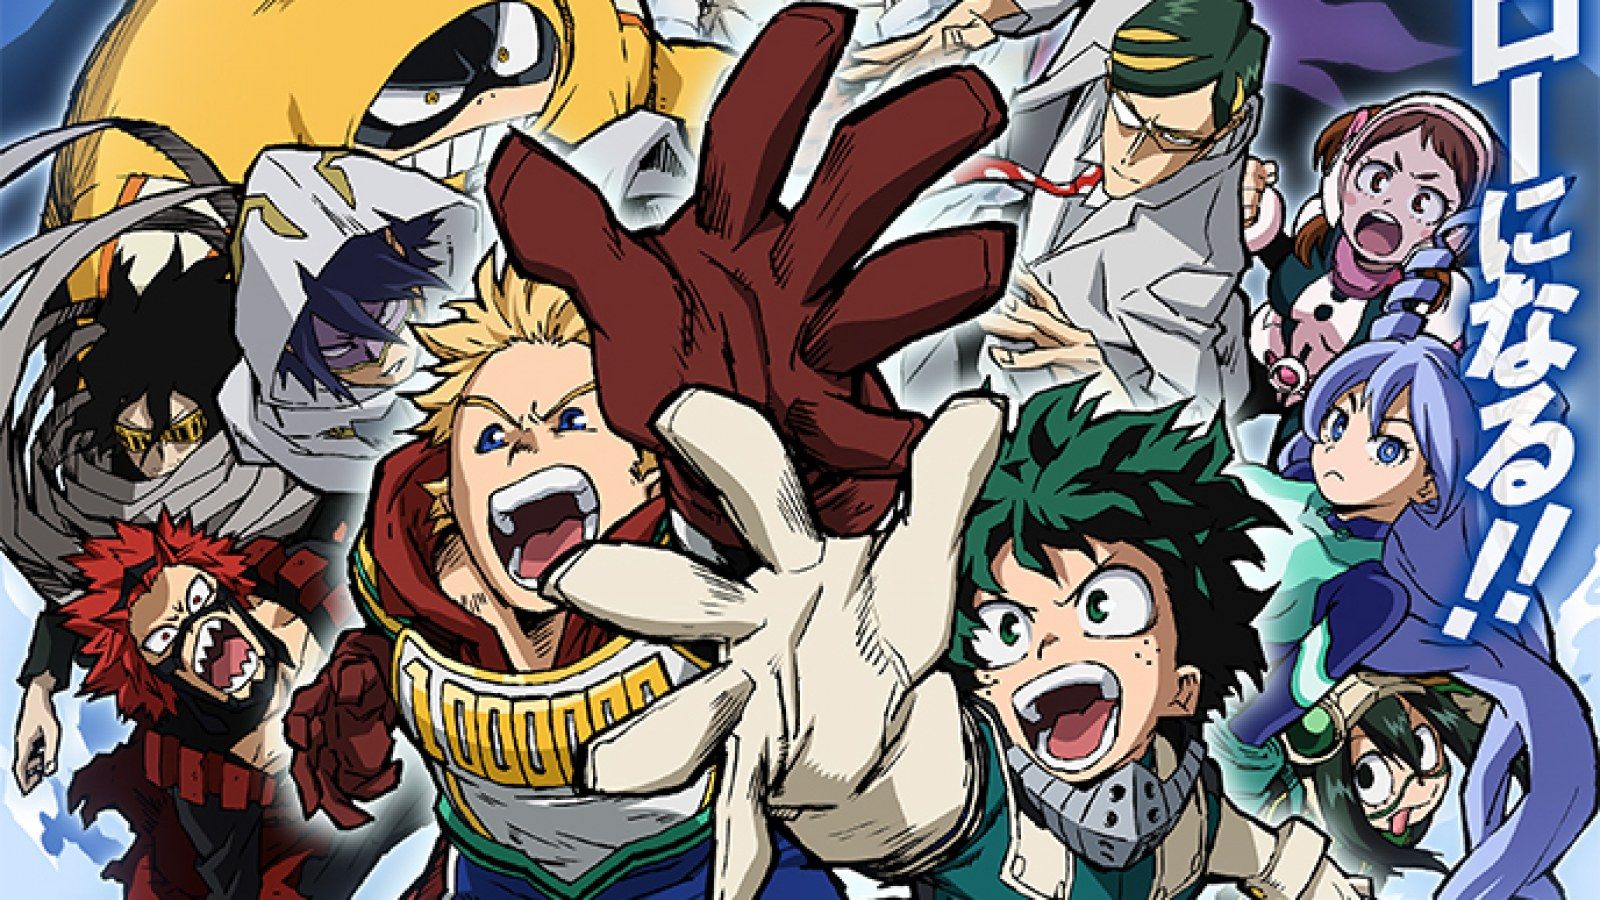 My Hero Academia' Season 4: When and How to Watch Latest Episodes Online